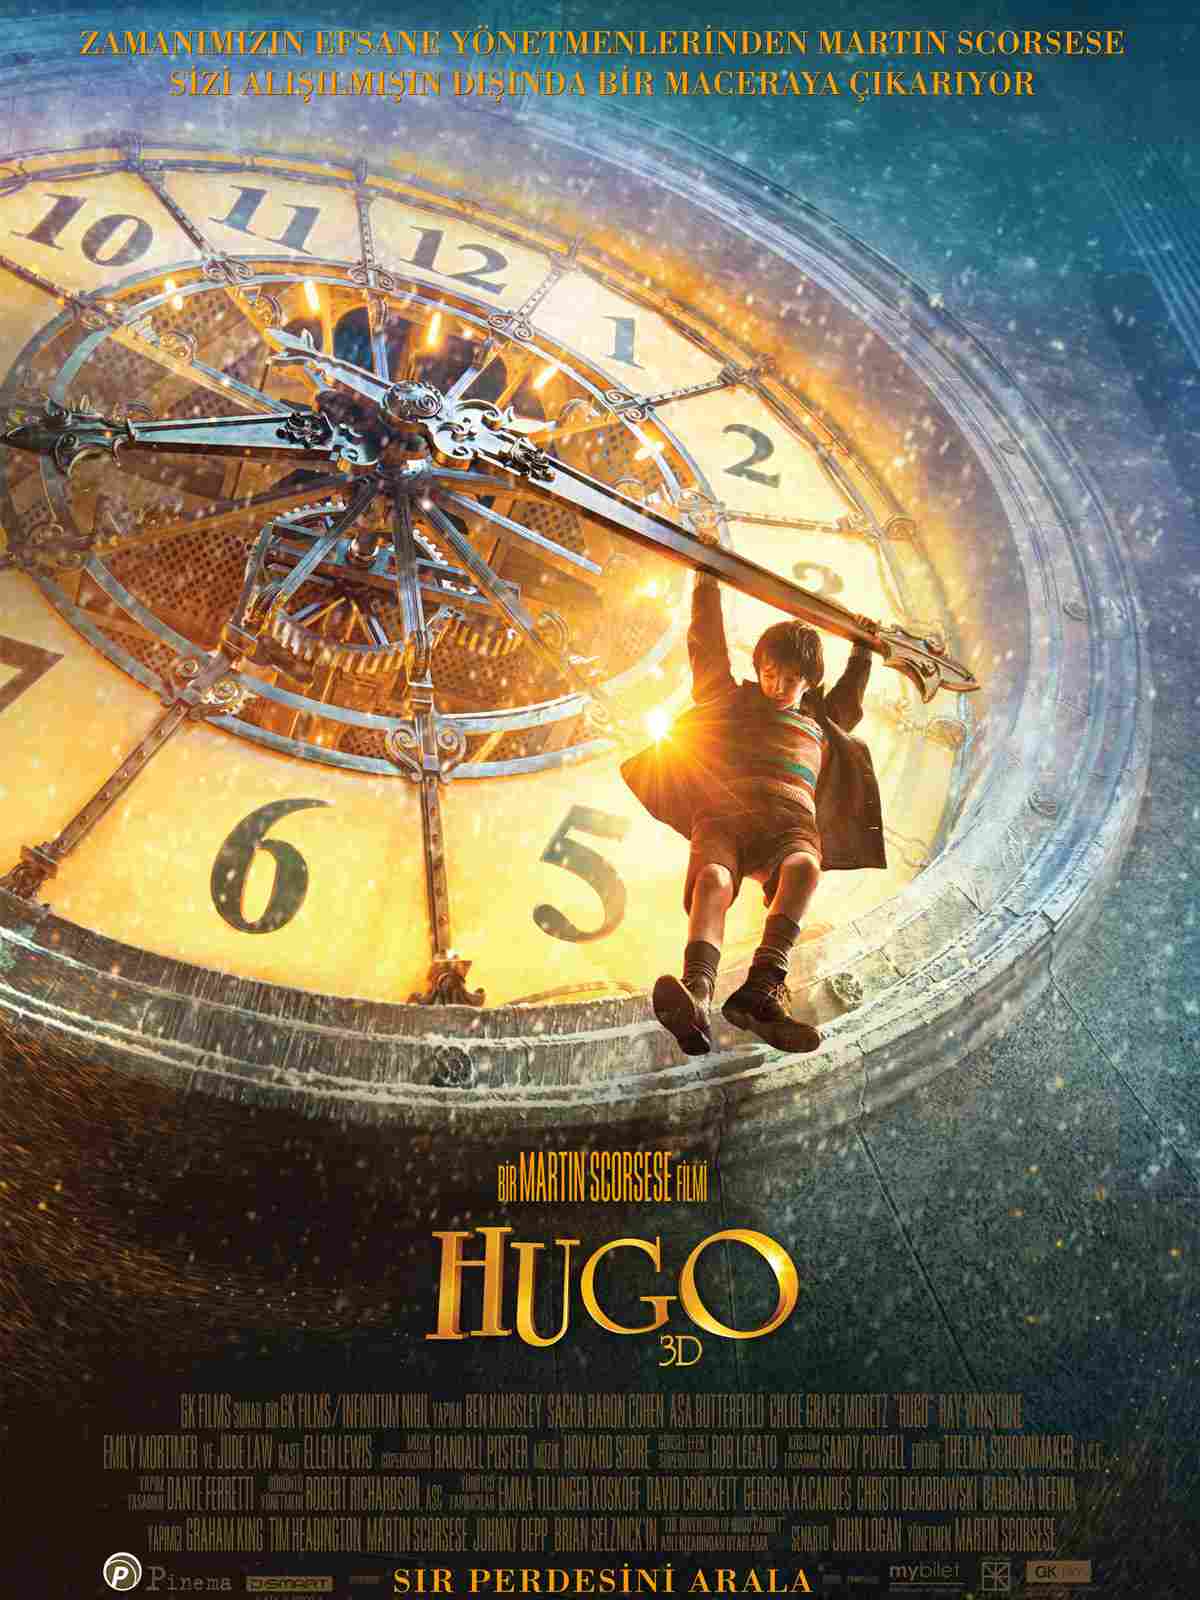 How To Understand Silent Cinema From One Scene in 'Hugo'